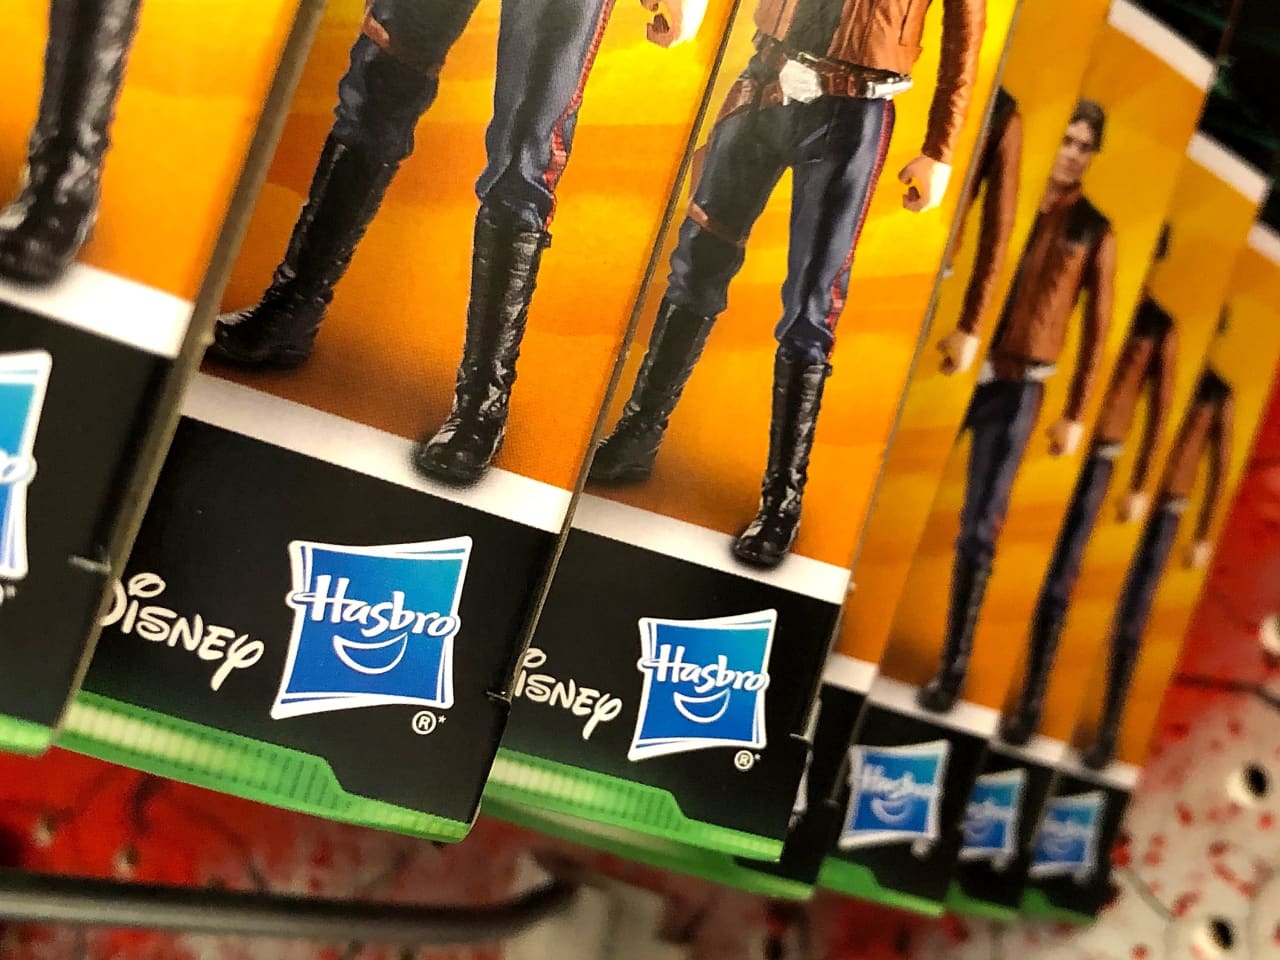 This underrated Hasbro business is gaining traction amid weaker toy demand, analysts say